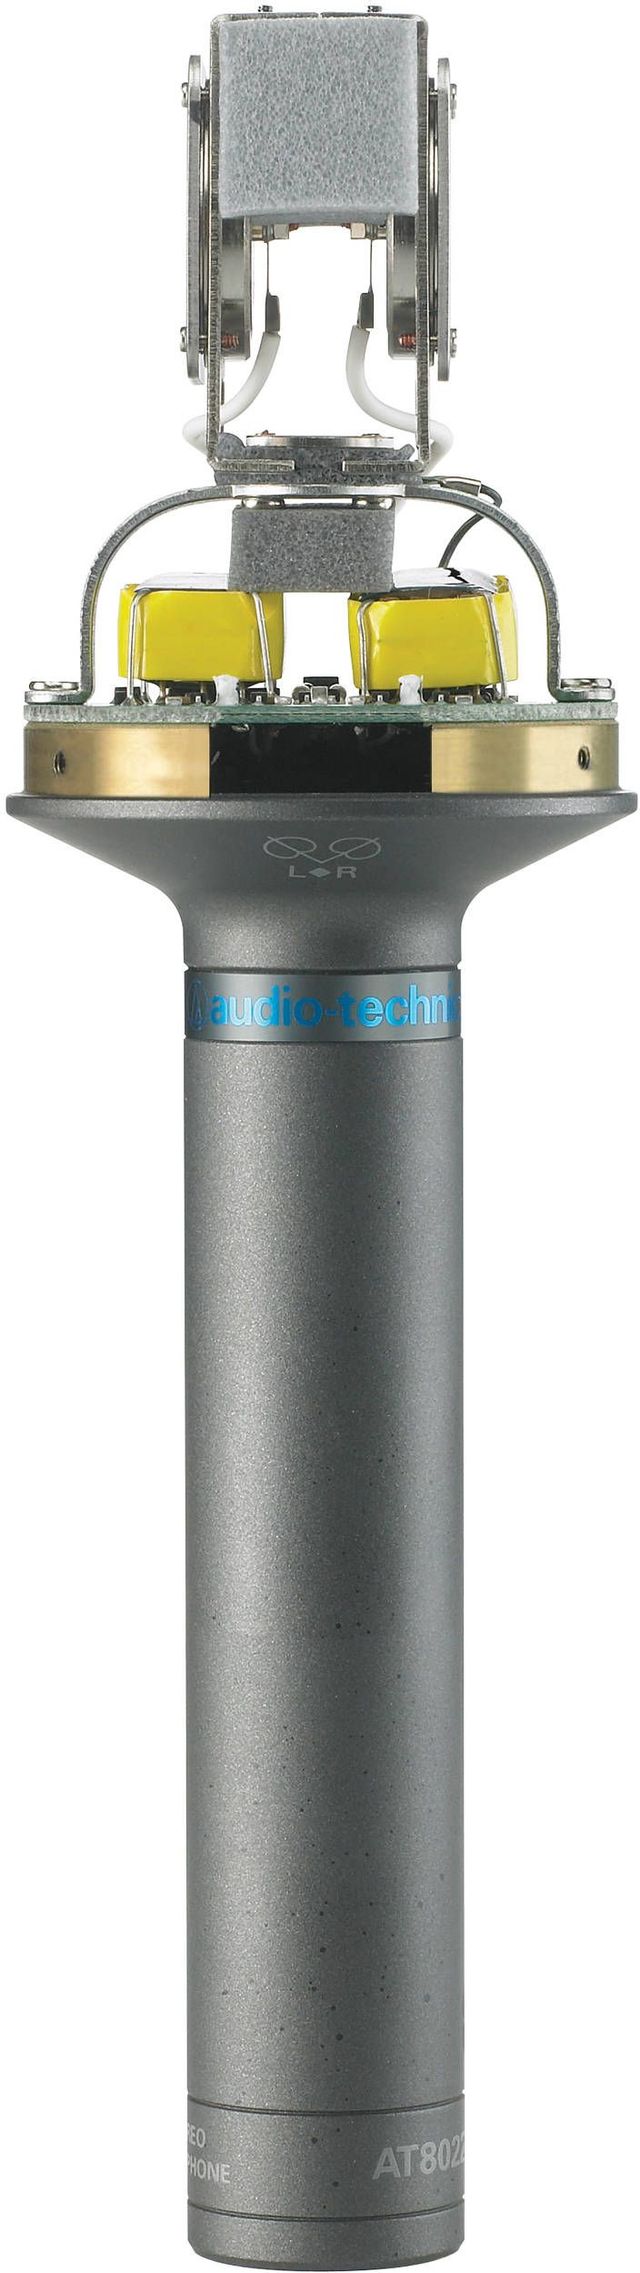 Audio-Technica® AT8022 X/Y Stereo Microphone 3